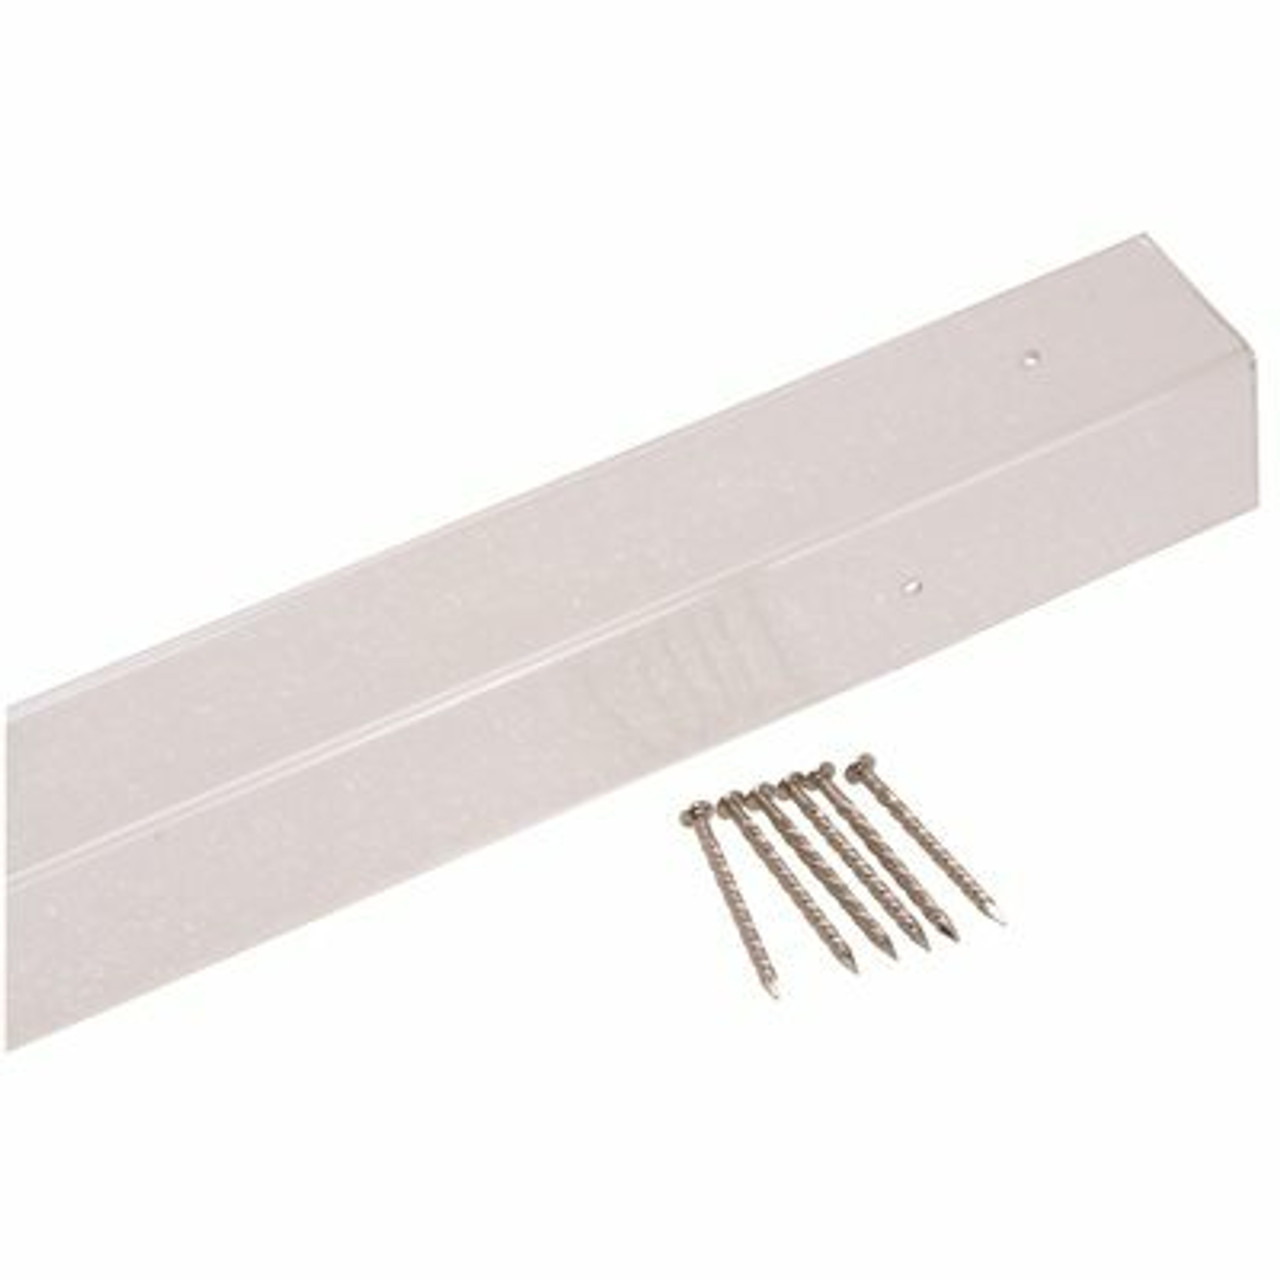 National Brand Alternative Corner Guards, Clear, 1-1/8 In. X 4 Ft., Pack Of 5